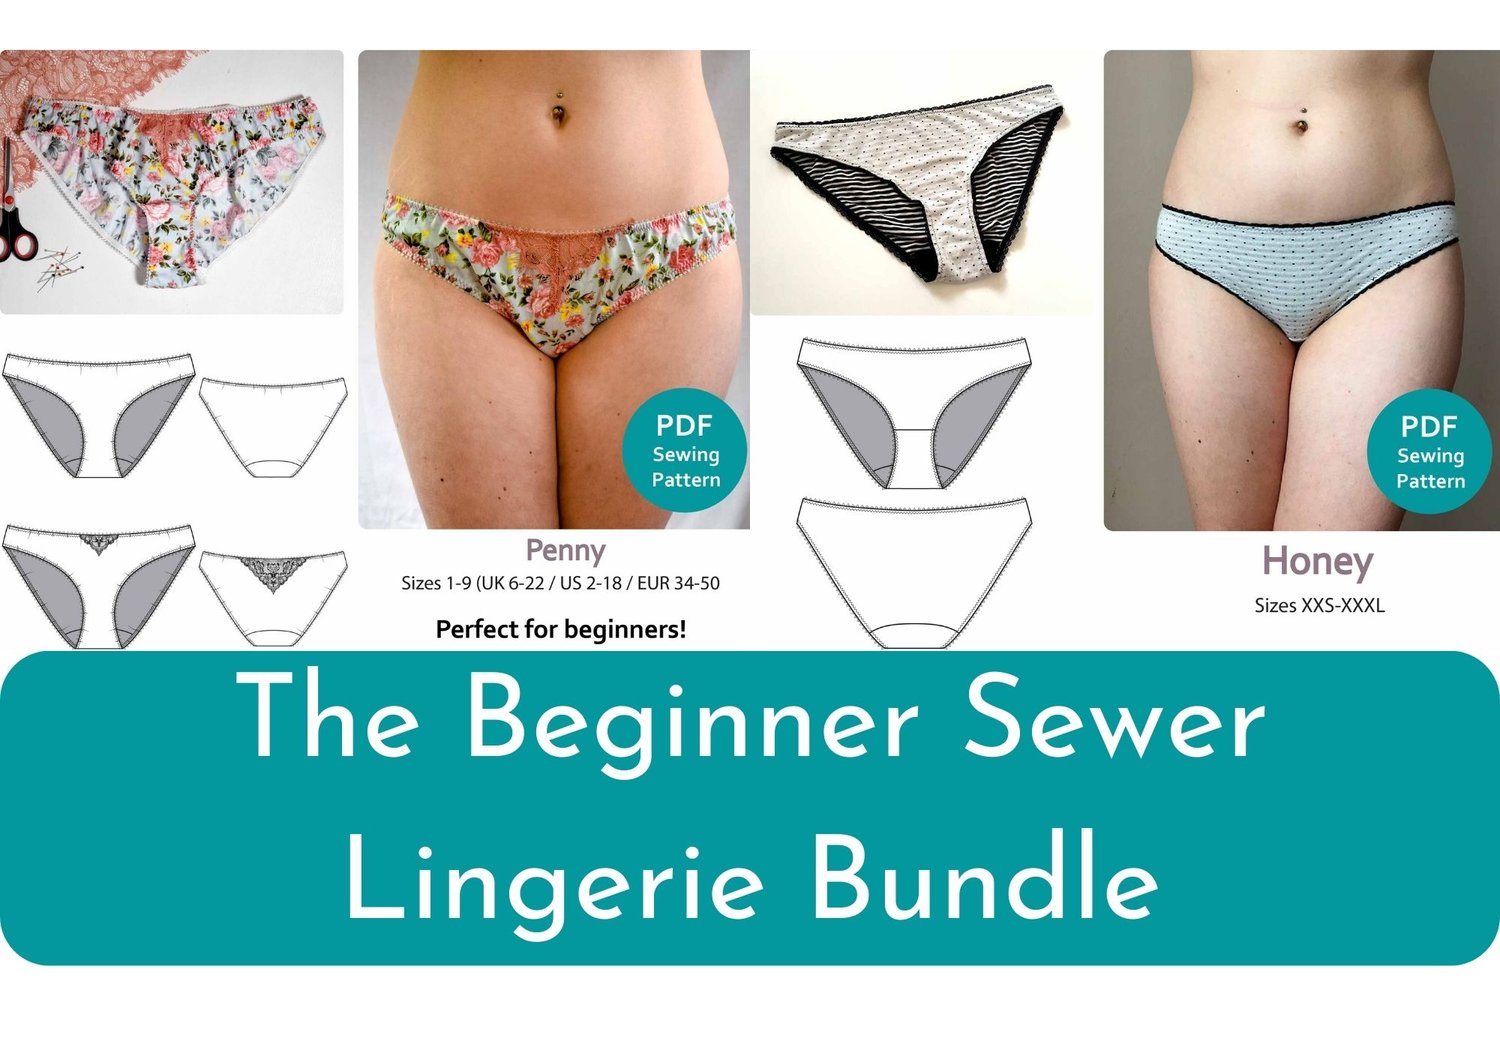 The Beginner Sewer Lingerie Bundle includes the Penny Knicker and Honey  Knicker Sewing Pattern - Payhip